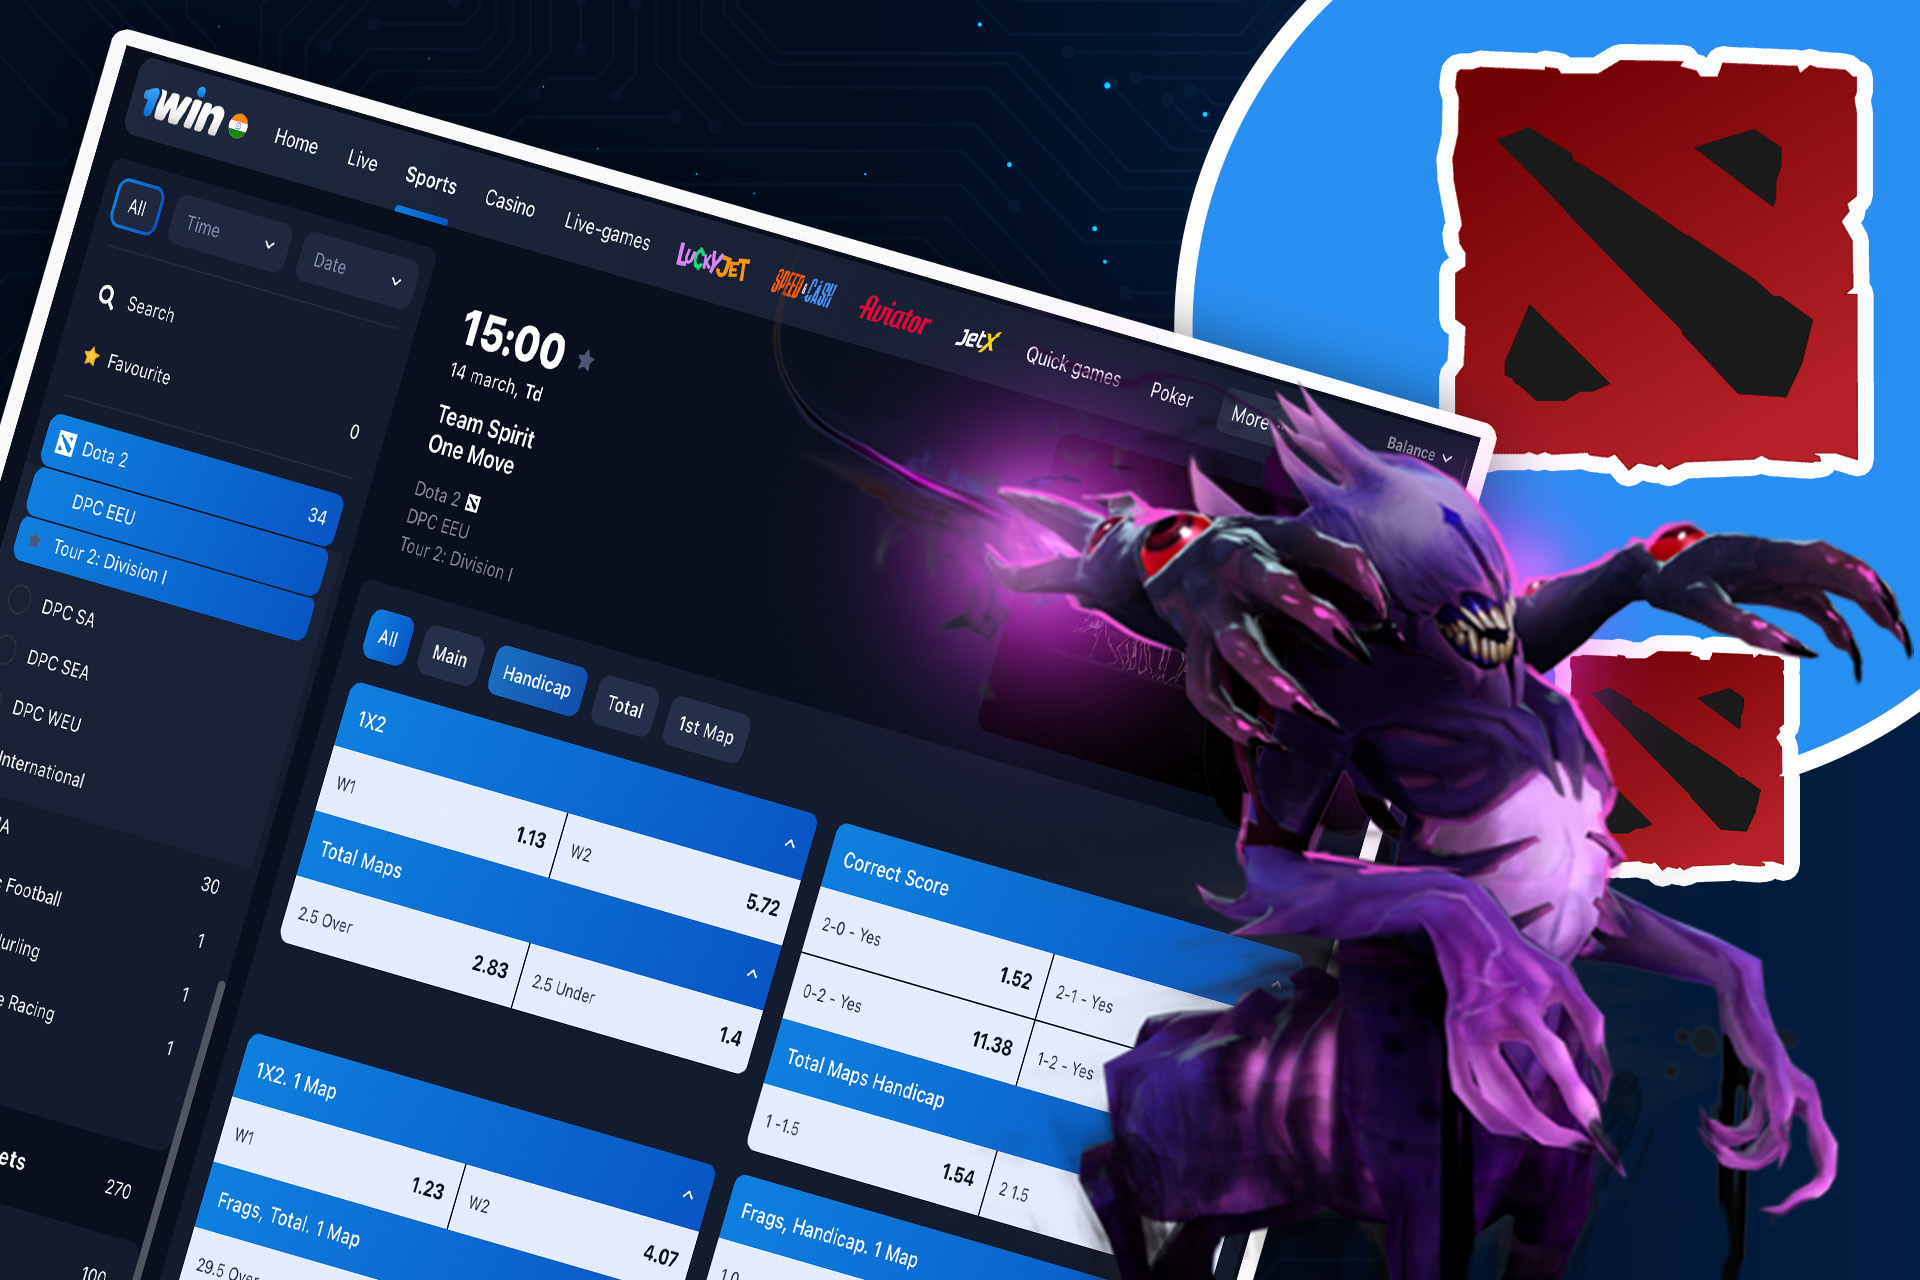 DOTA 2 is also among the betting options of the 1win sportsbook.